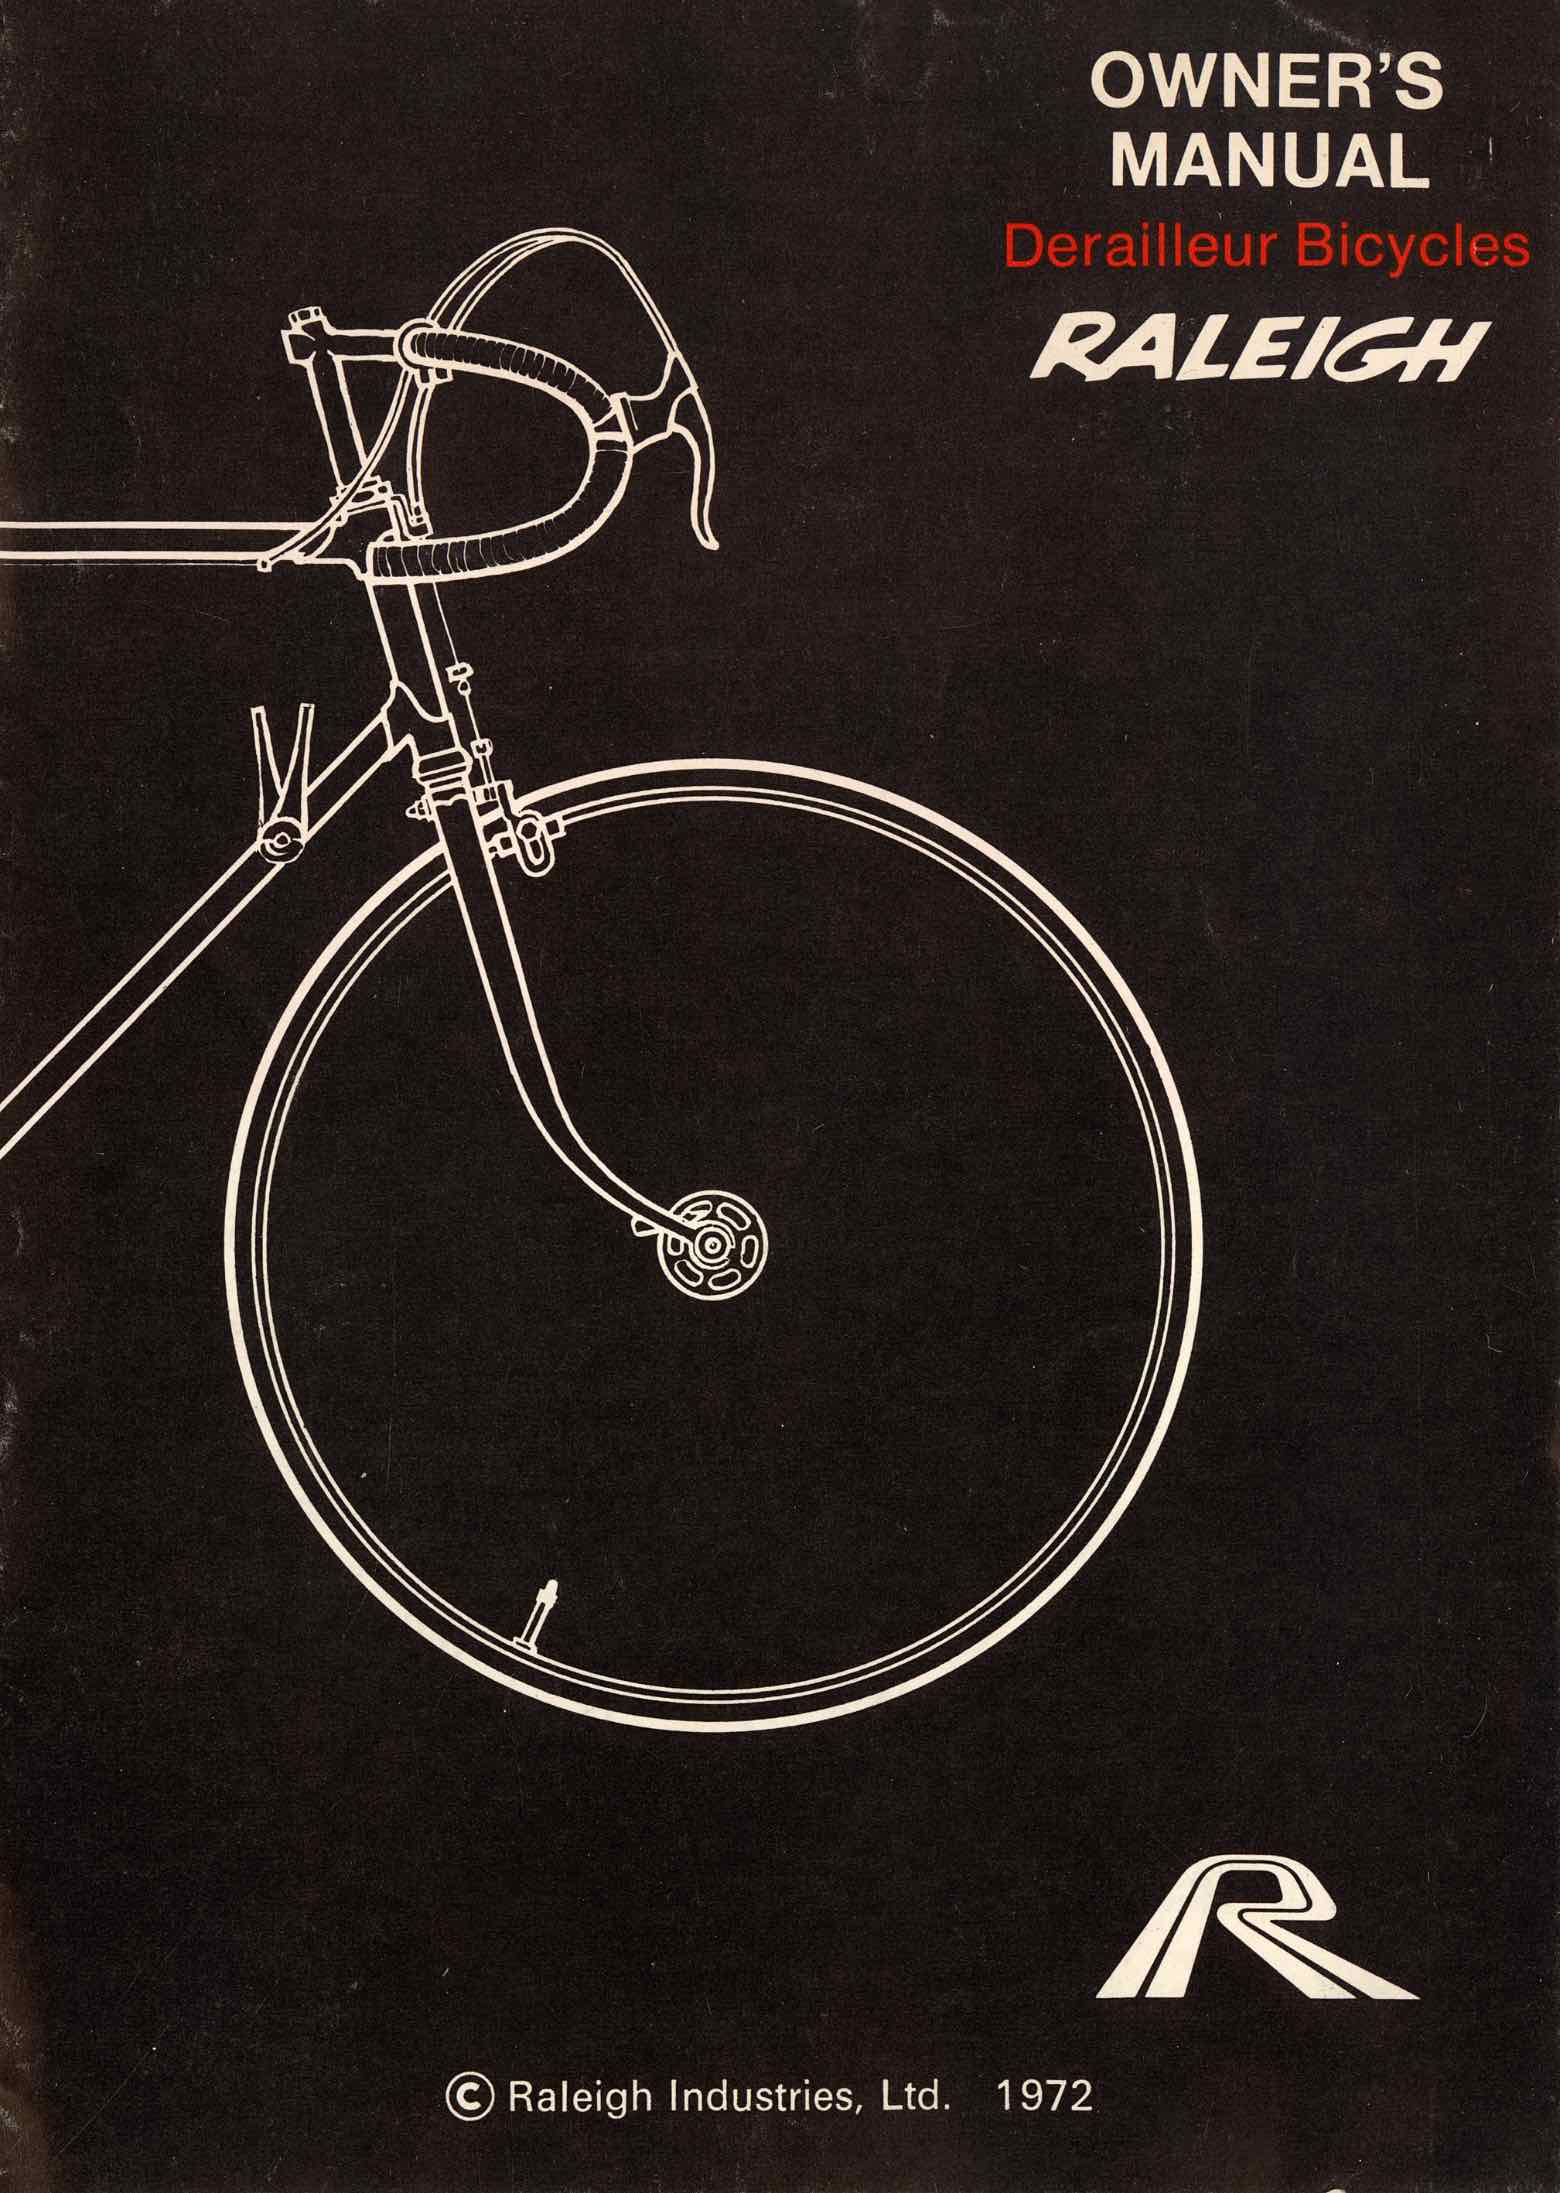 Raleigh Owners Manual - Derailleur Bicycles page 1 main image